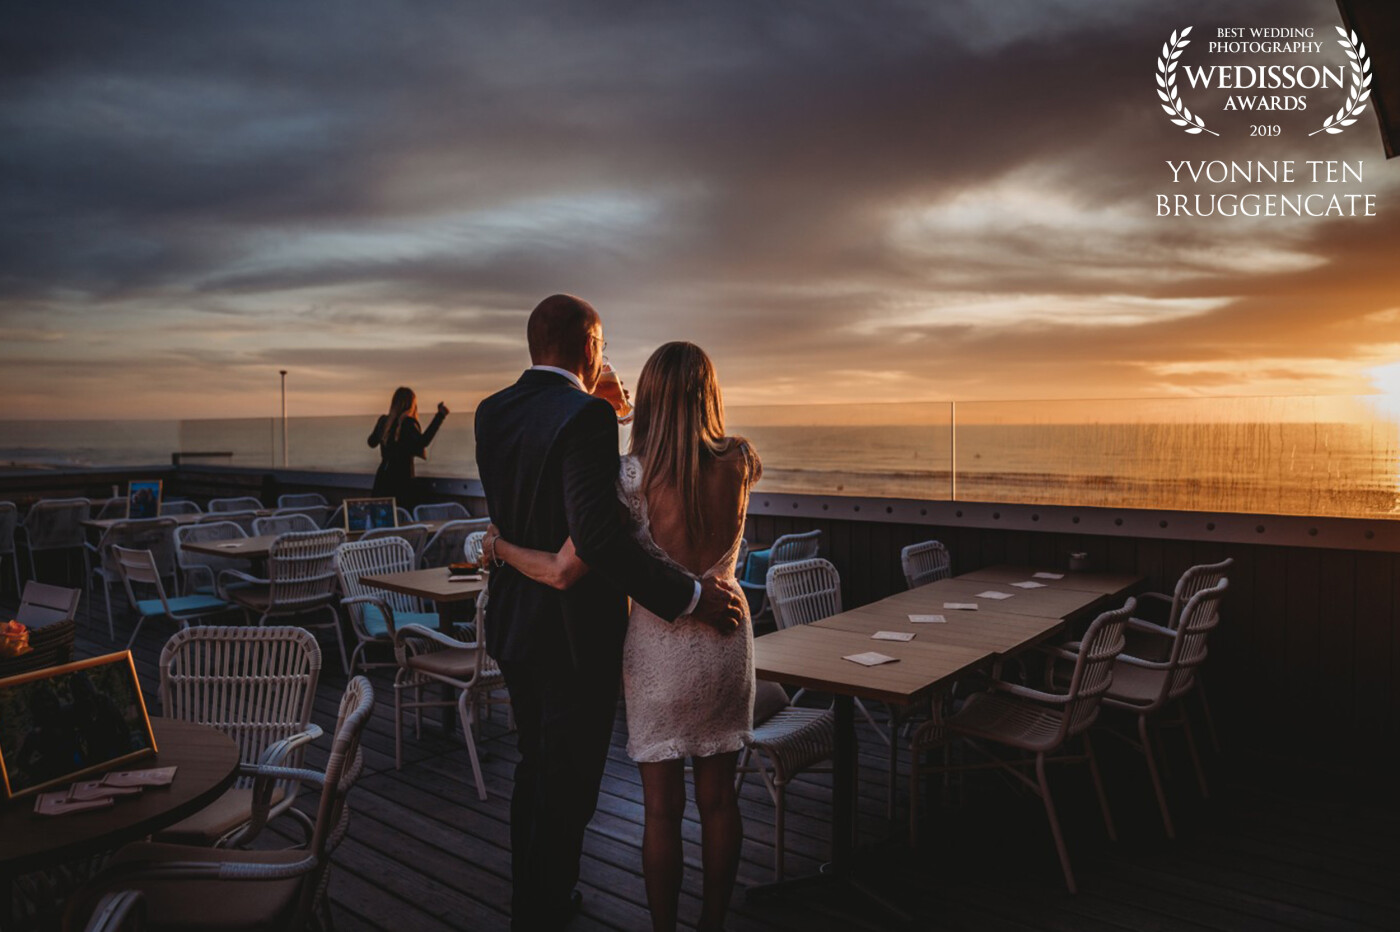 These two lovebirds got married in Canada. When home in Holland, they booked a lovely after wedding shoot on the Beach to celebrate their love. At this moment they are waiting for their guests to arrive, watching the most beautiful sunset. Their daughter is in the background 